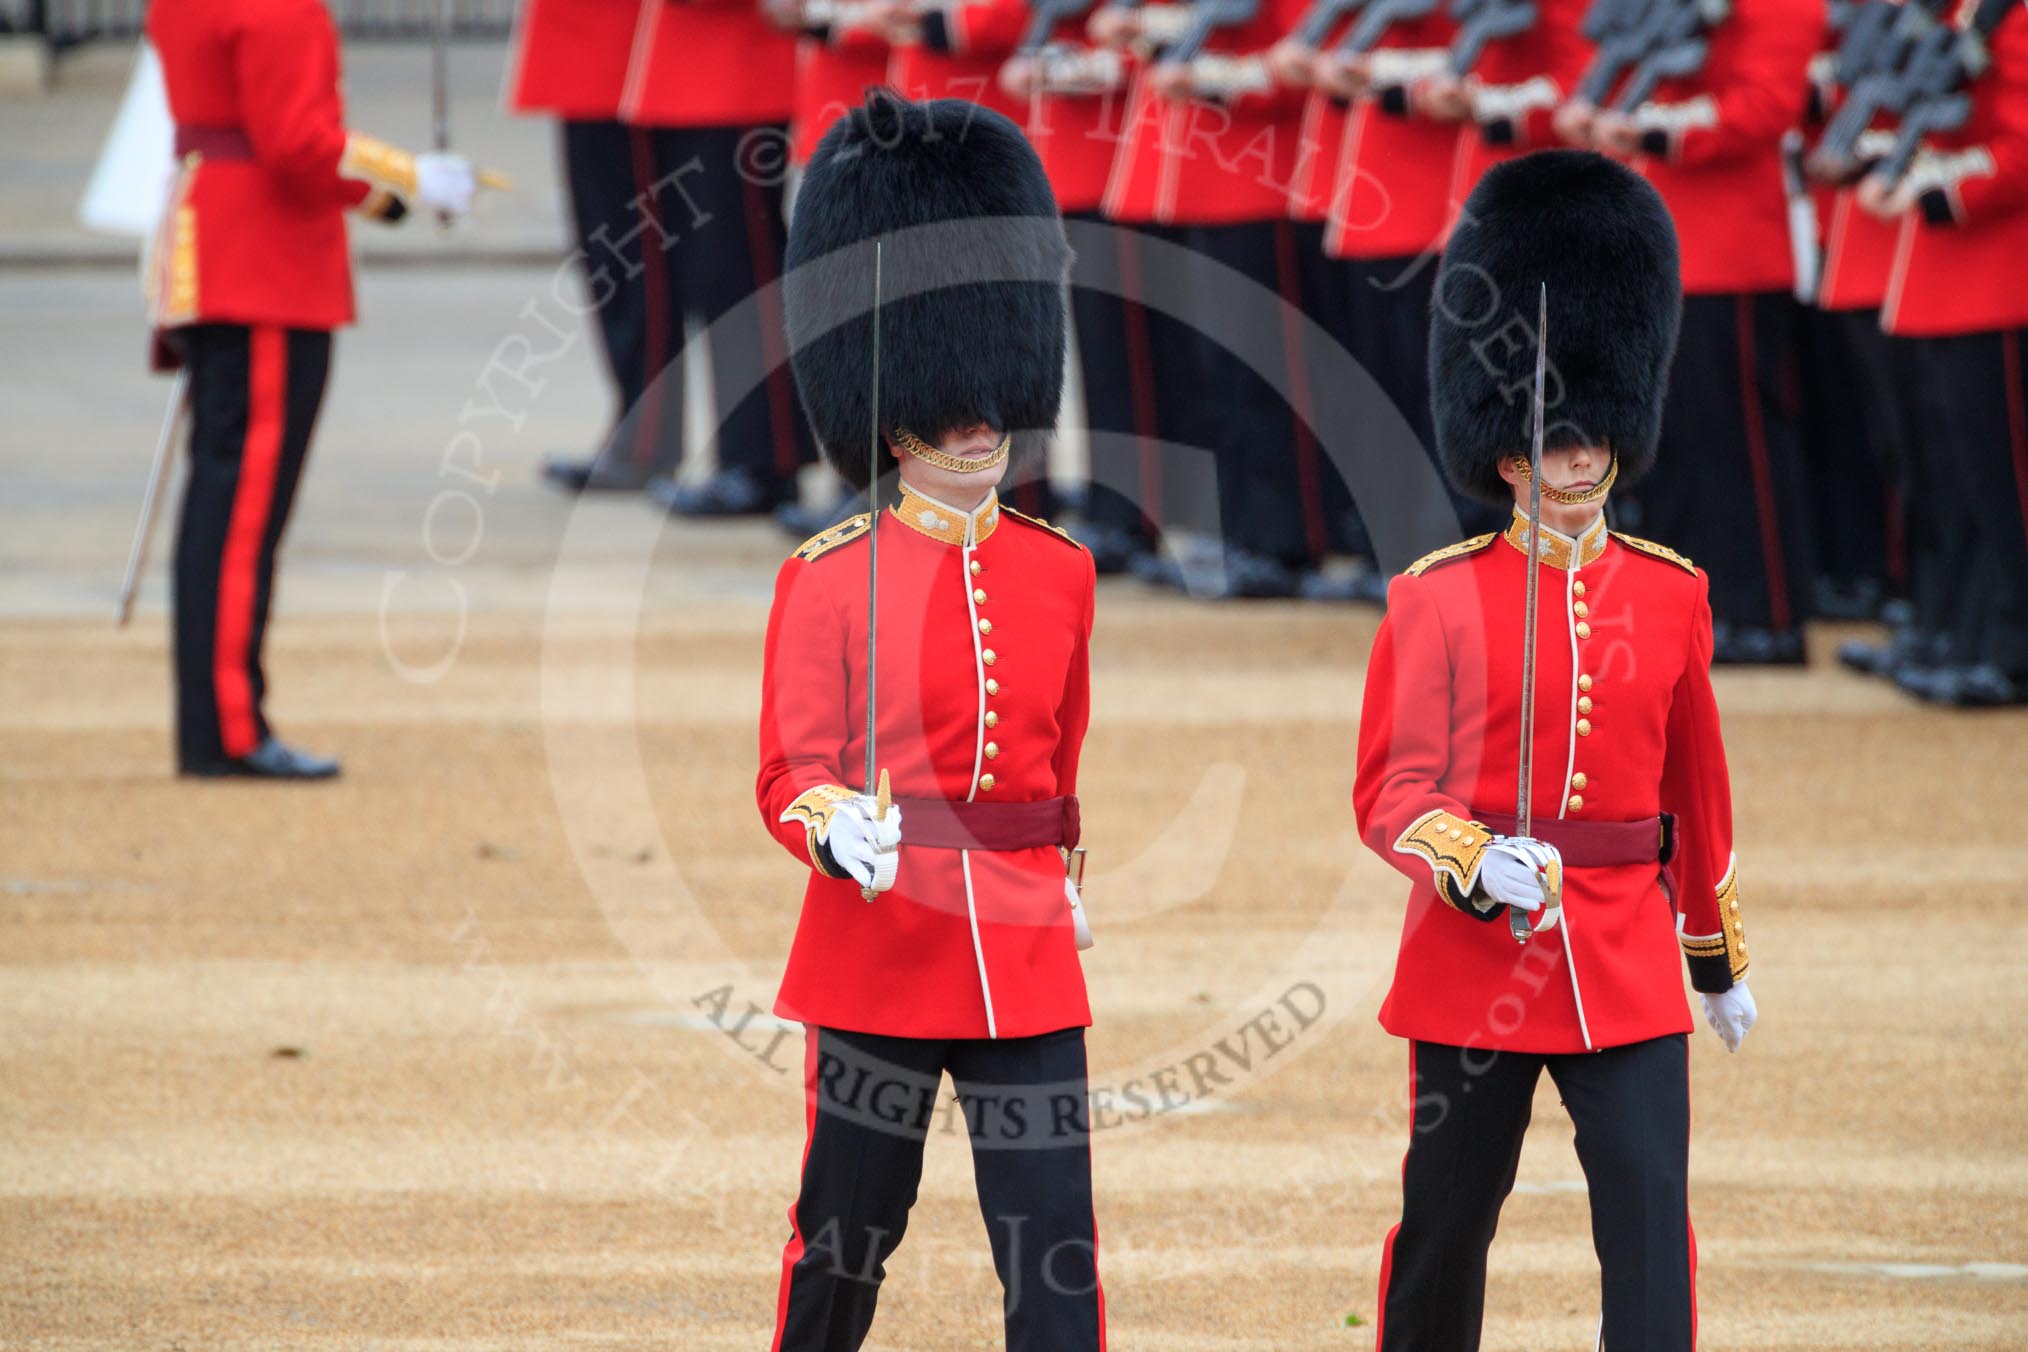 during The Colonel's Review {iptcyear4} (final rehearsal for Trooping the Colour, The Queen's Birthday Parade)  at Horse Guards Parade, Westminster, London, 2 June 2018, 10:29.